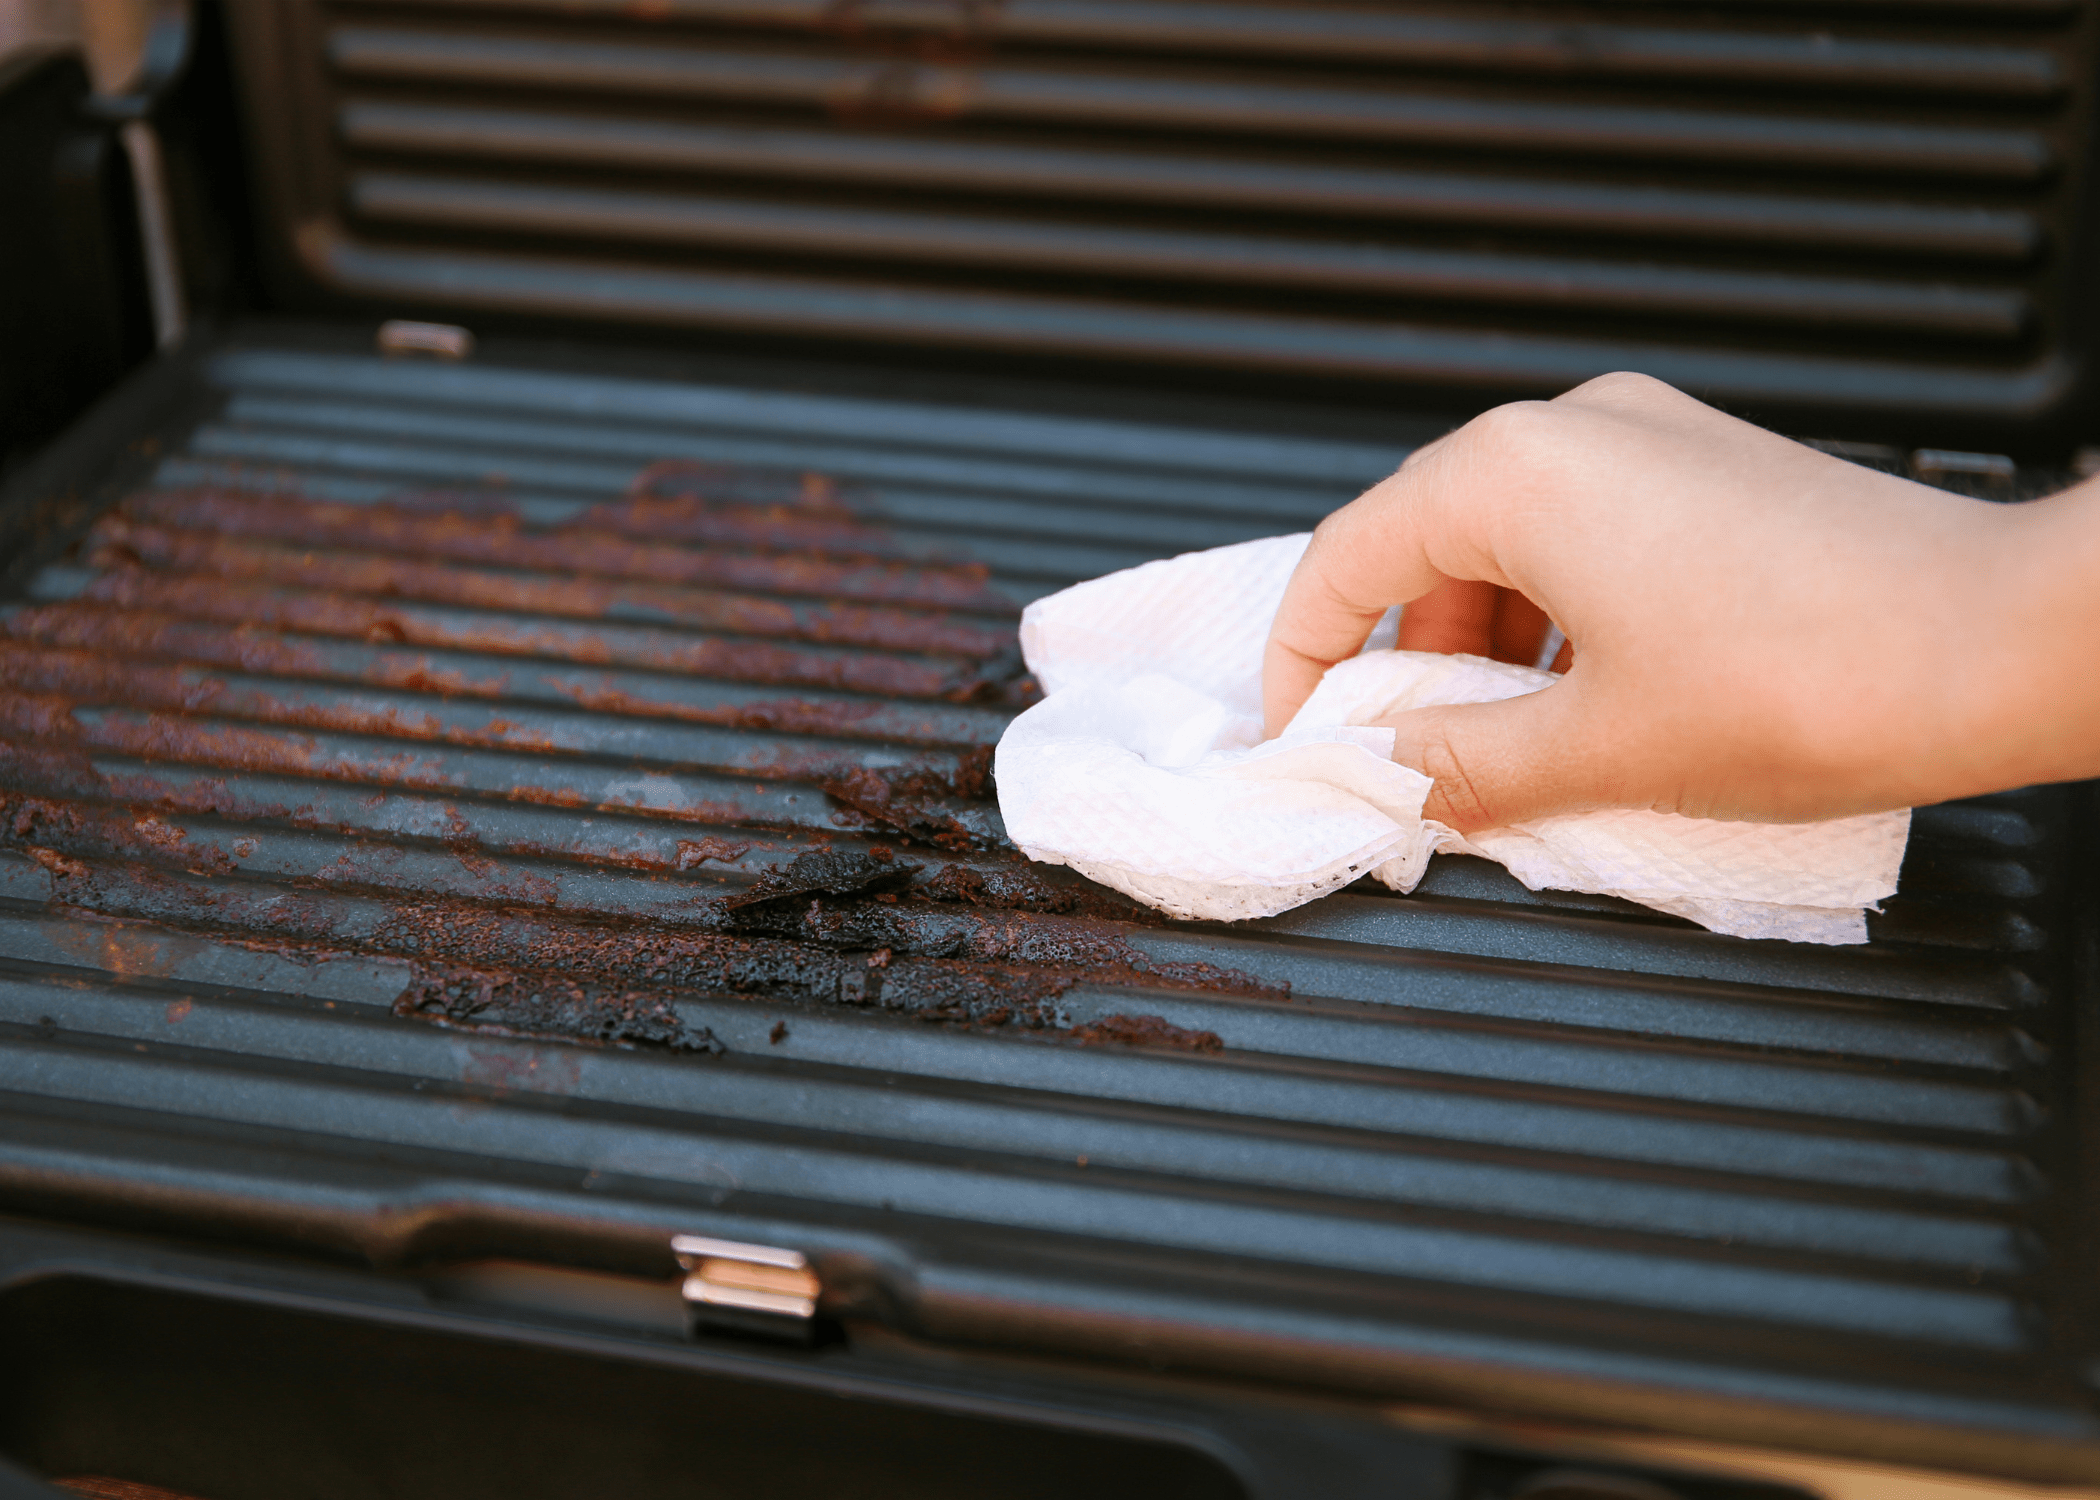 cleaning grill with brush